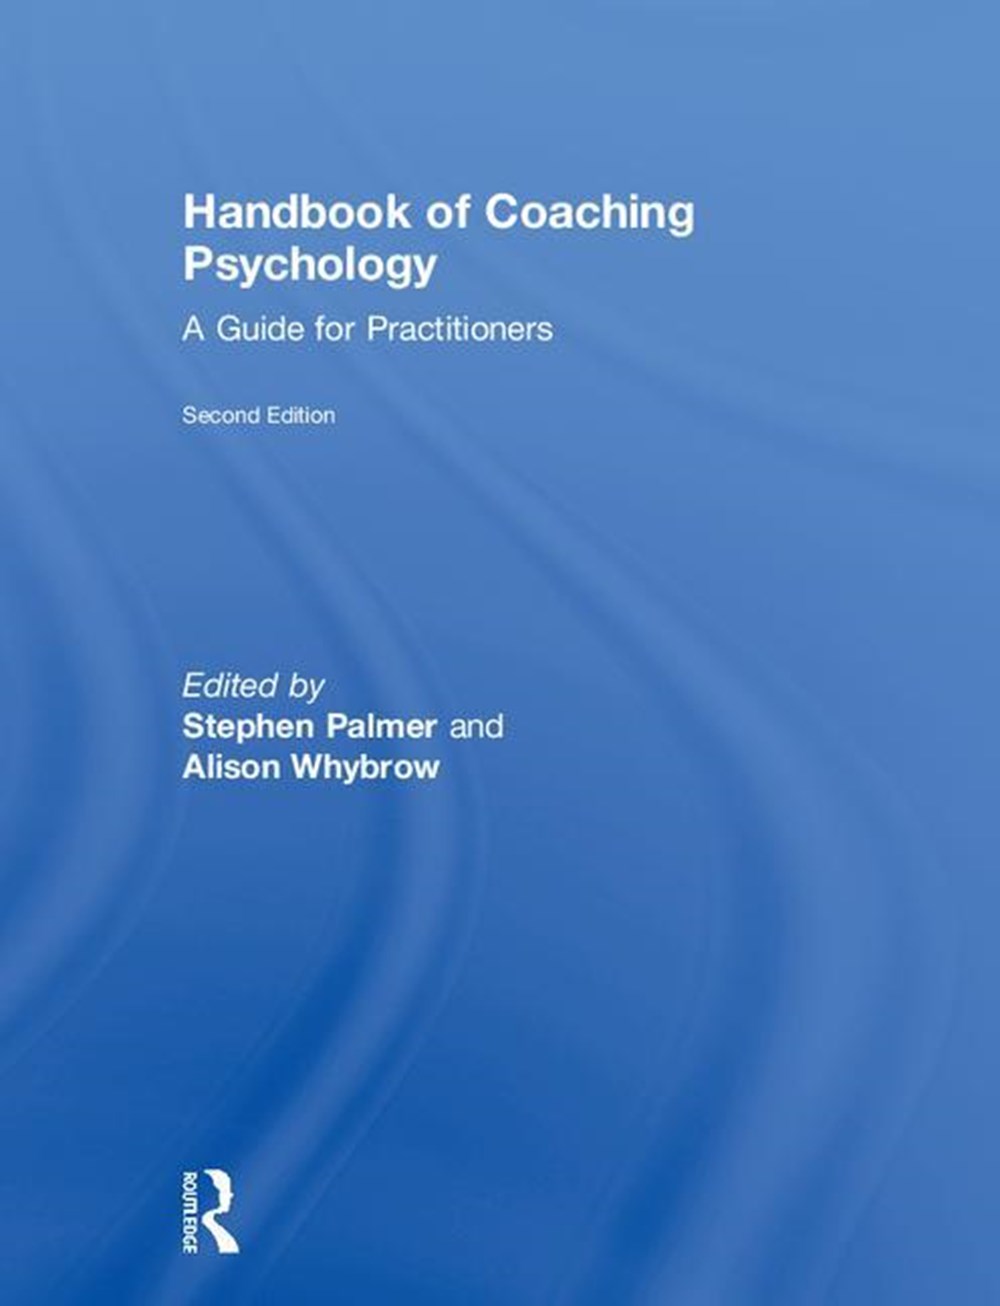 Handbook of Coaching Psychology: A Guide for Practitioners